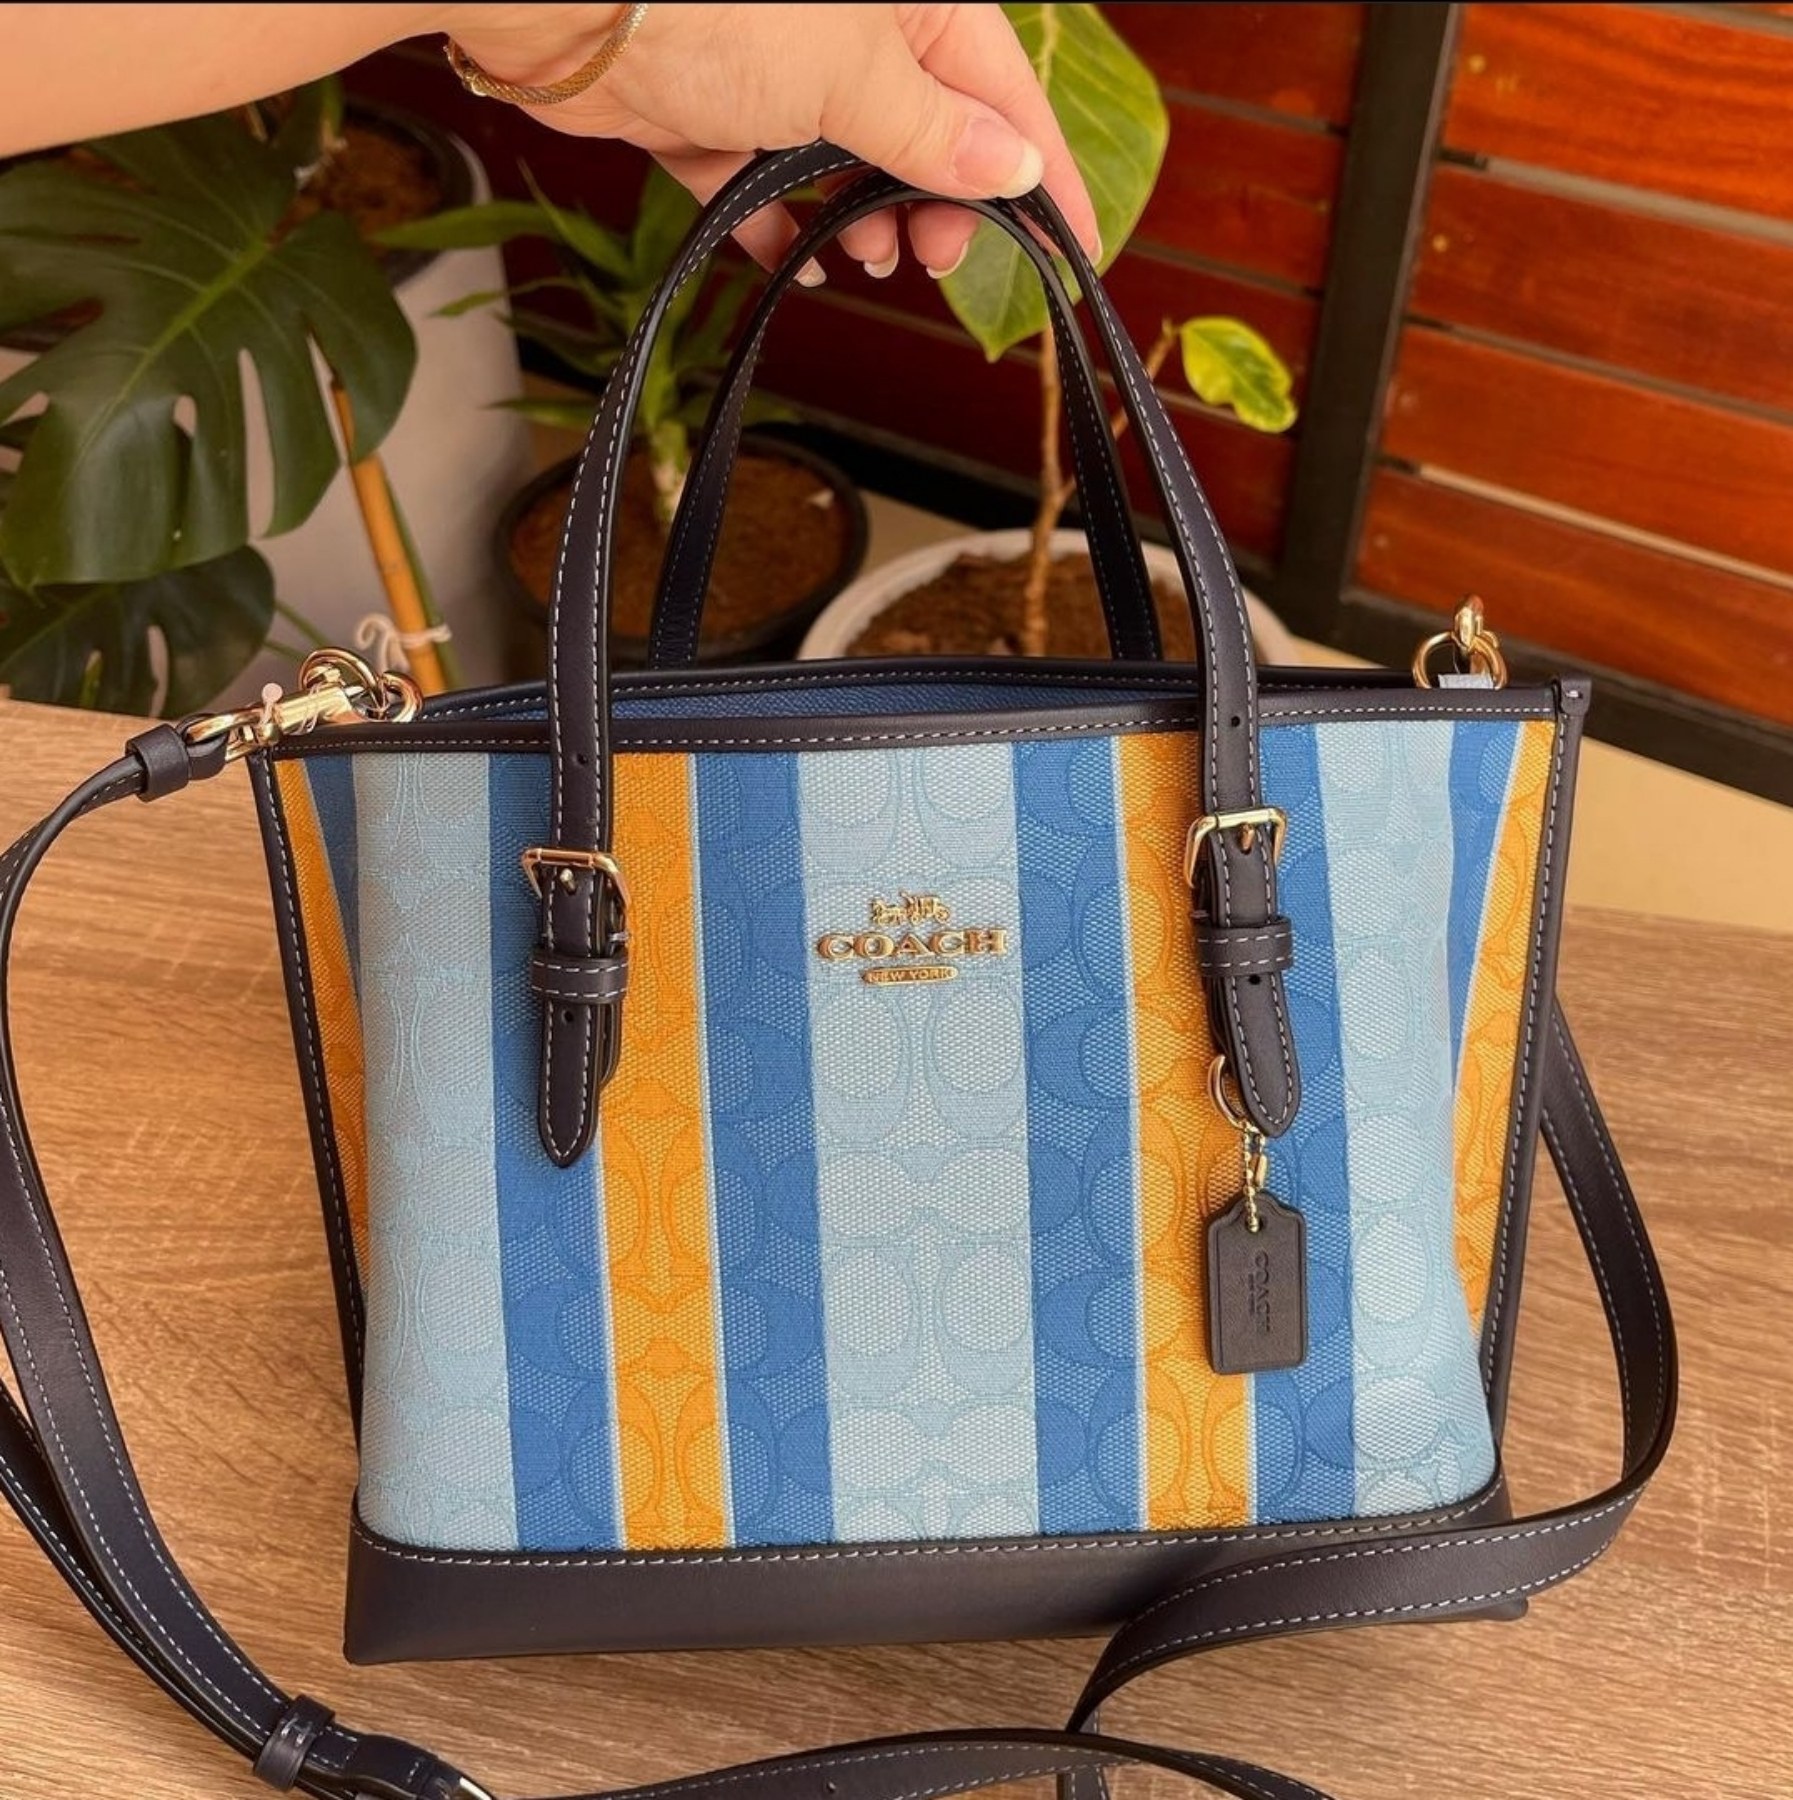 Coach C4086 Mollie Tote 25 in Blue / Yellow Signature Jacquard with Stripes  and Smooth Leather Details with Detachable Strap - Women's Bag | Lazada PH